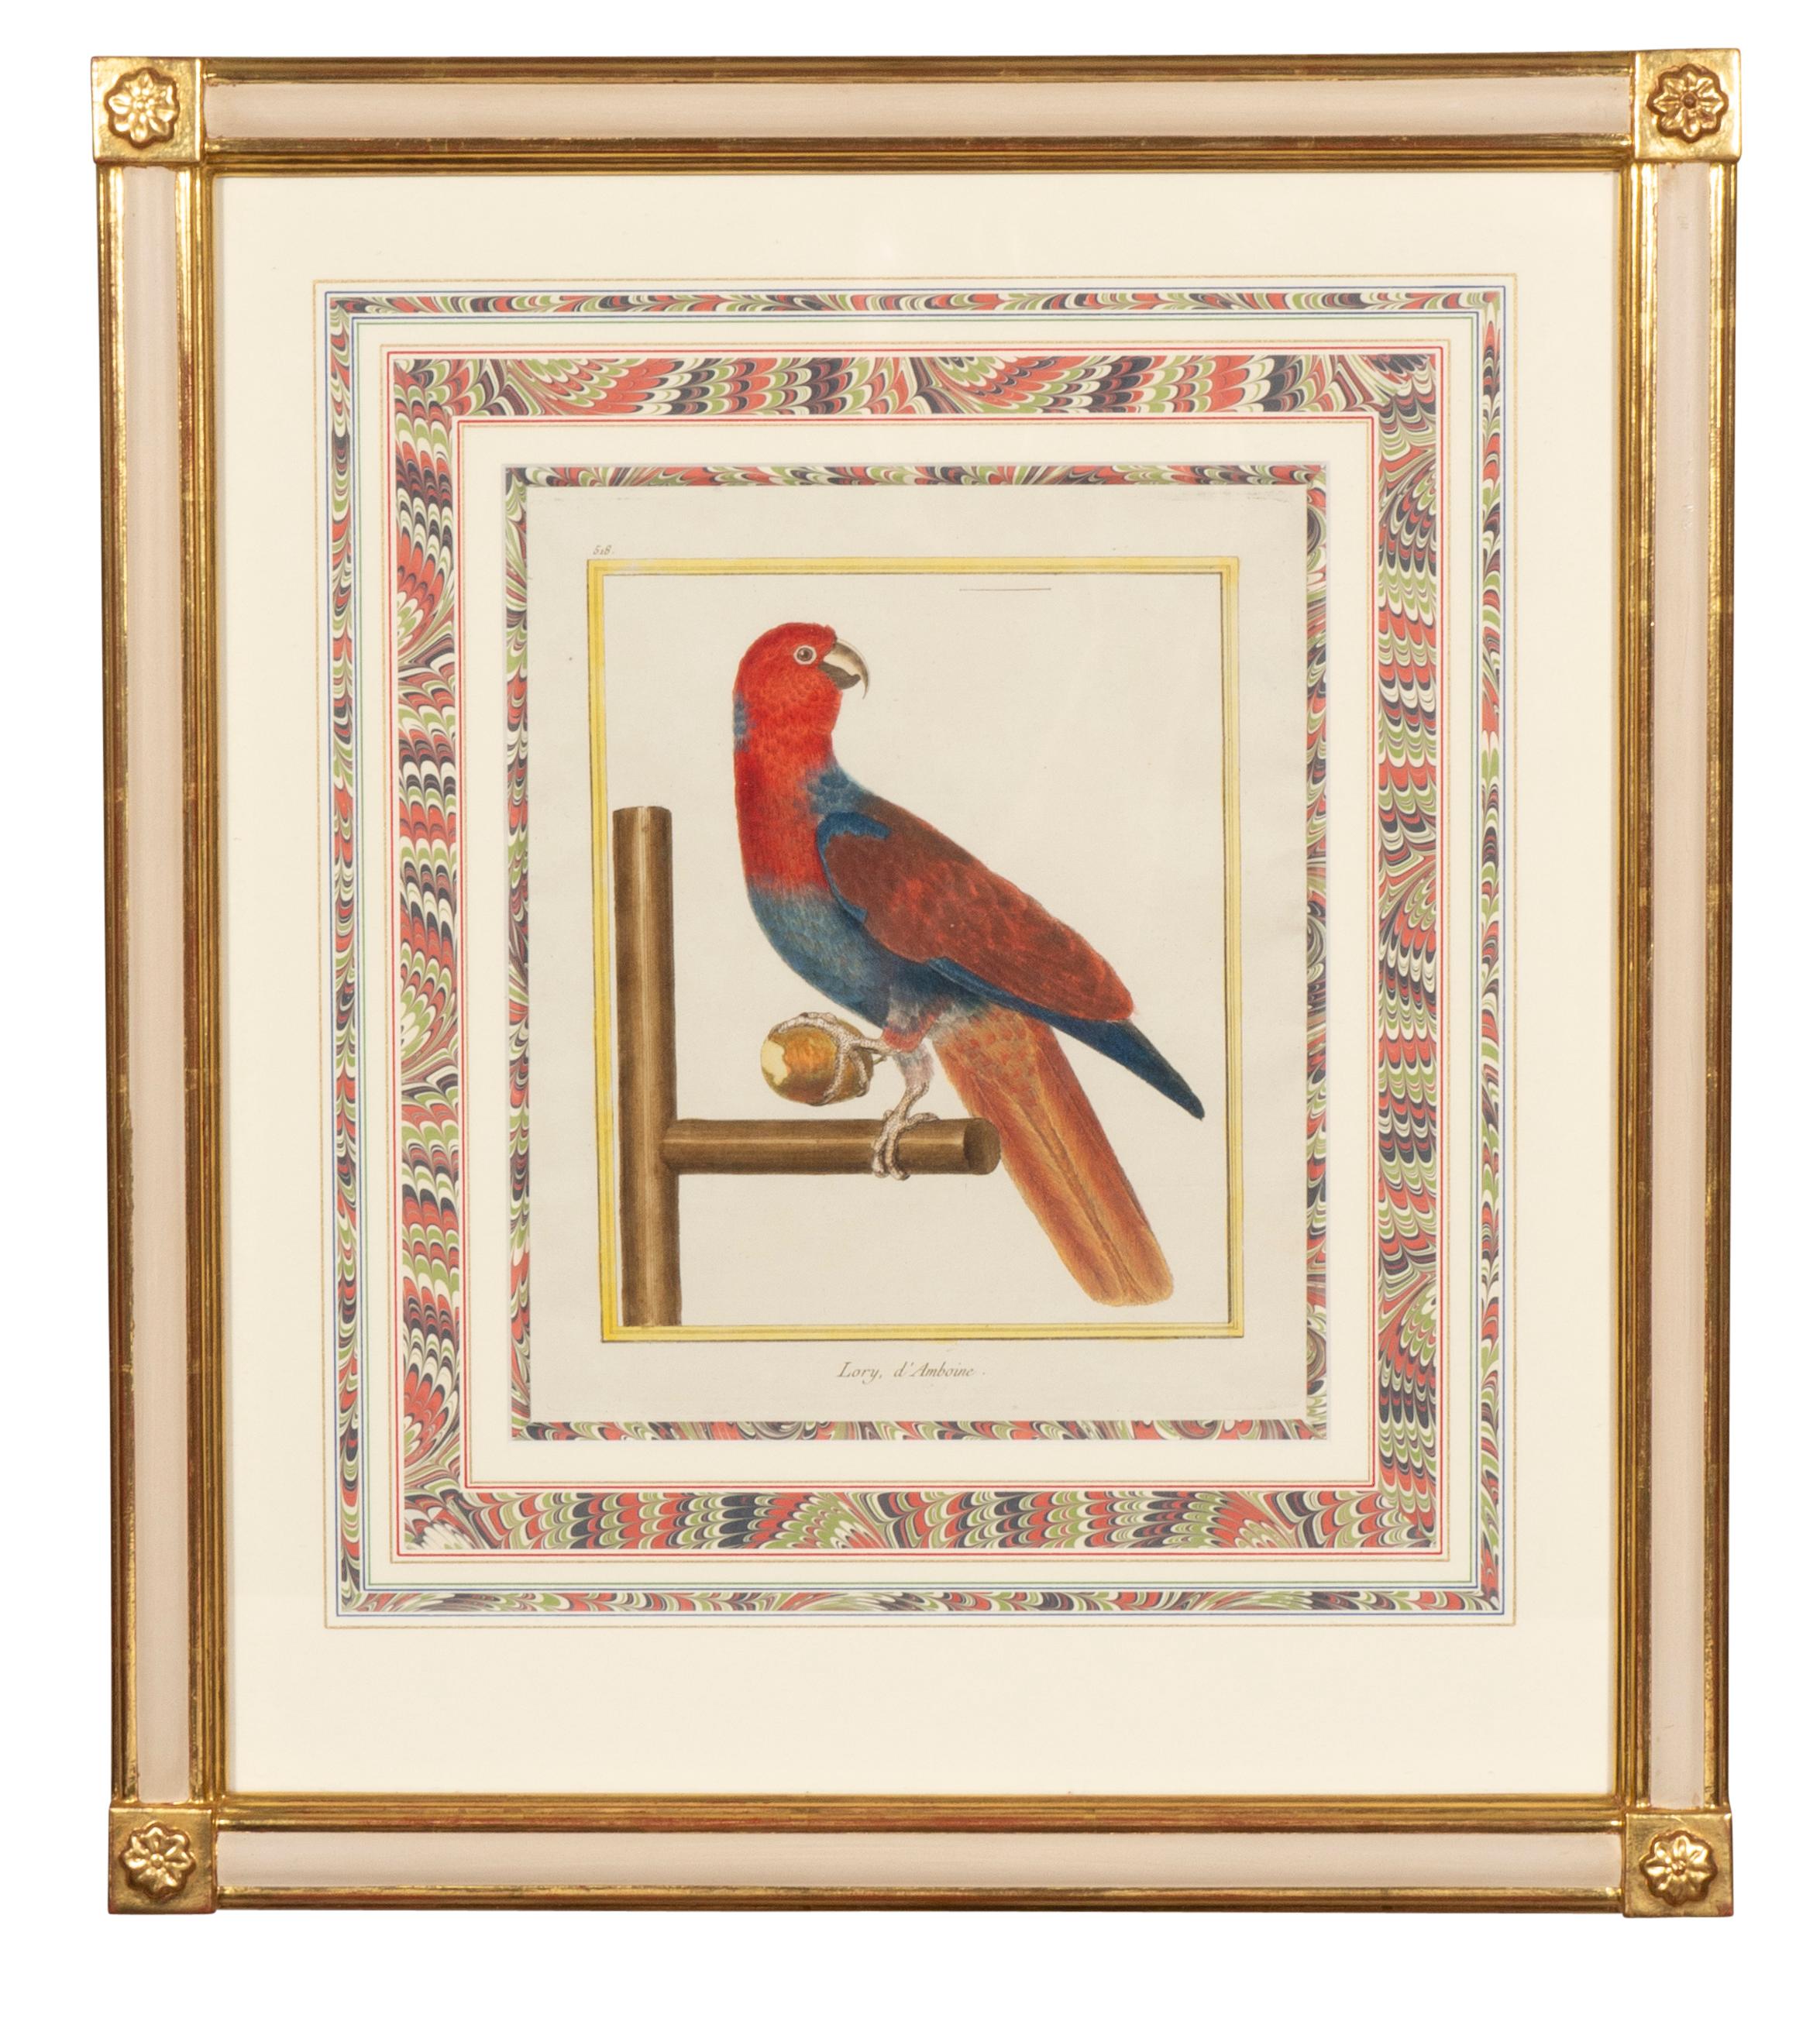 Exquisitely framed. Water gilded frames. Hand colored birds. Marbled matting.